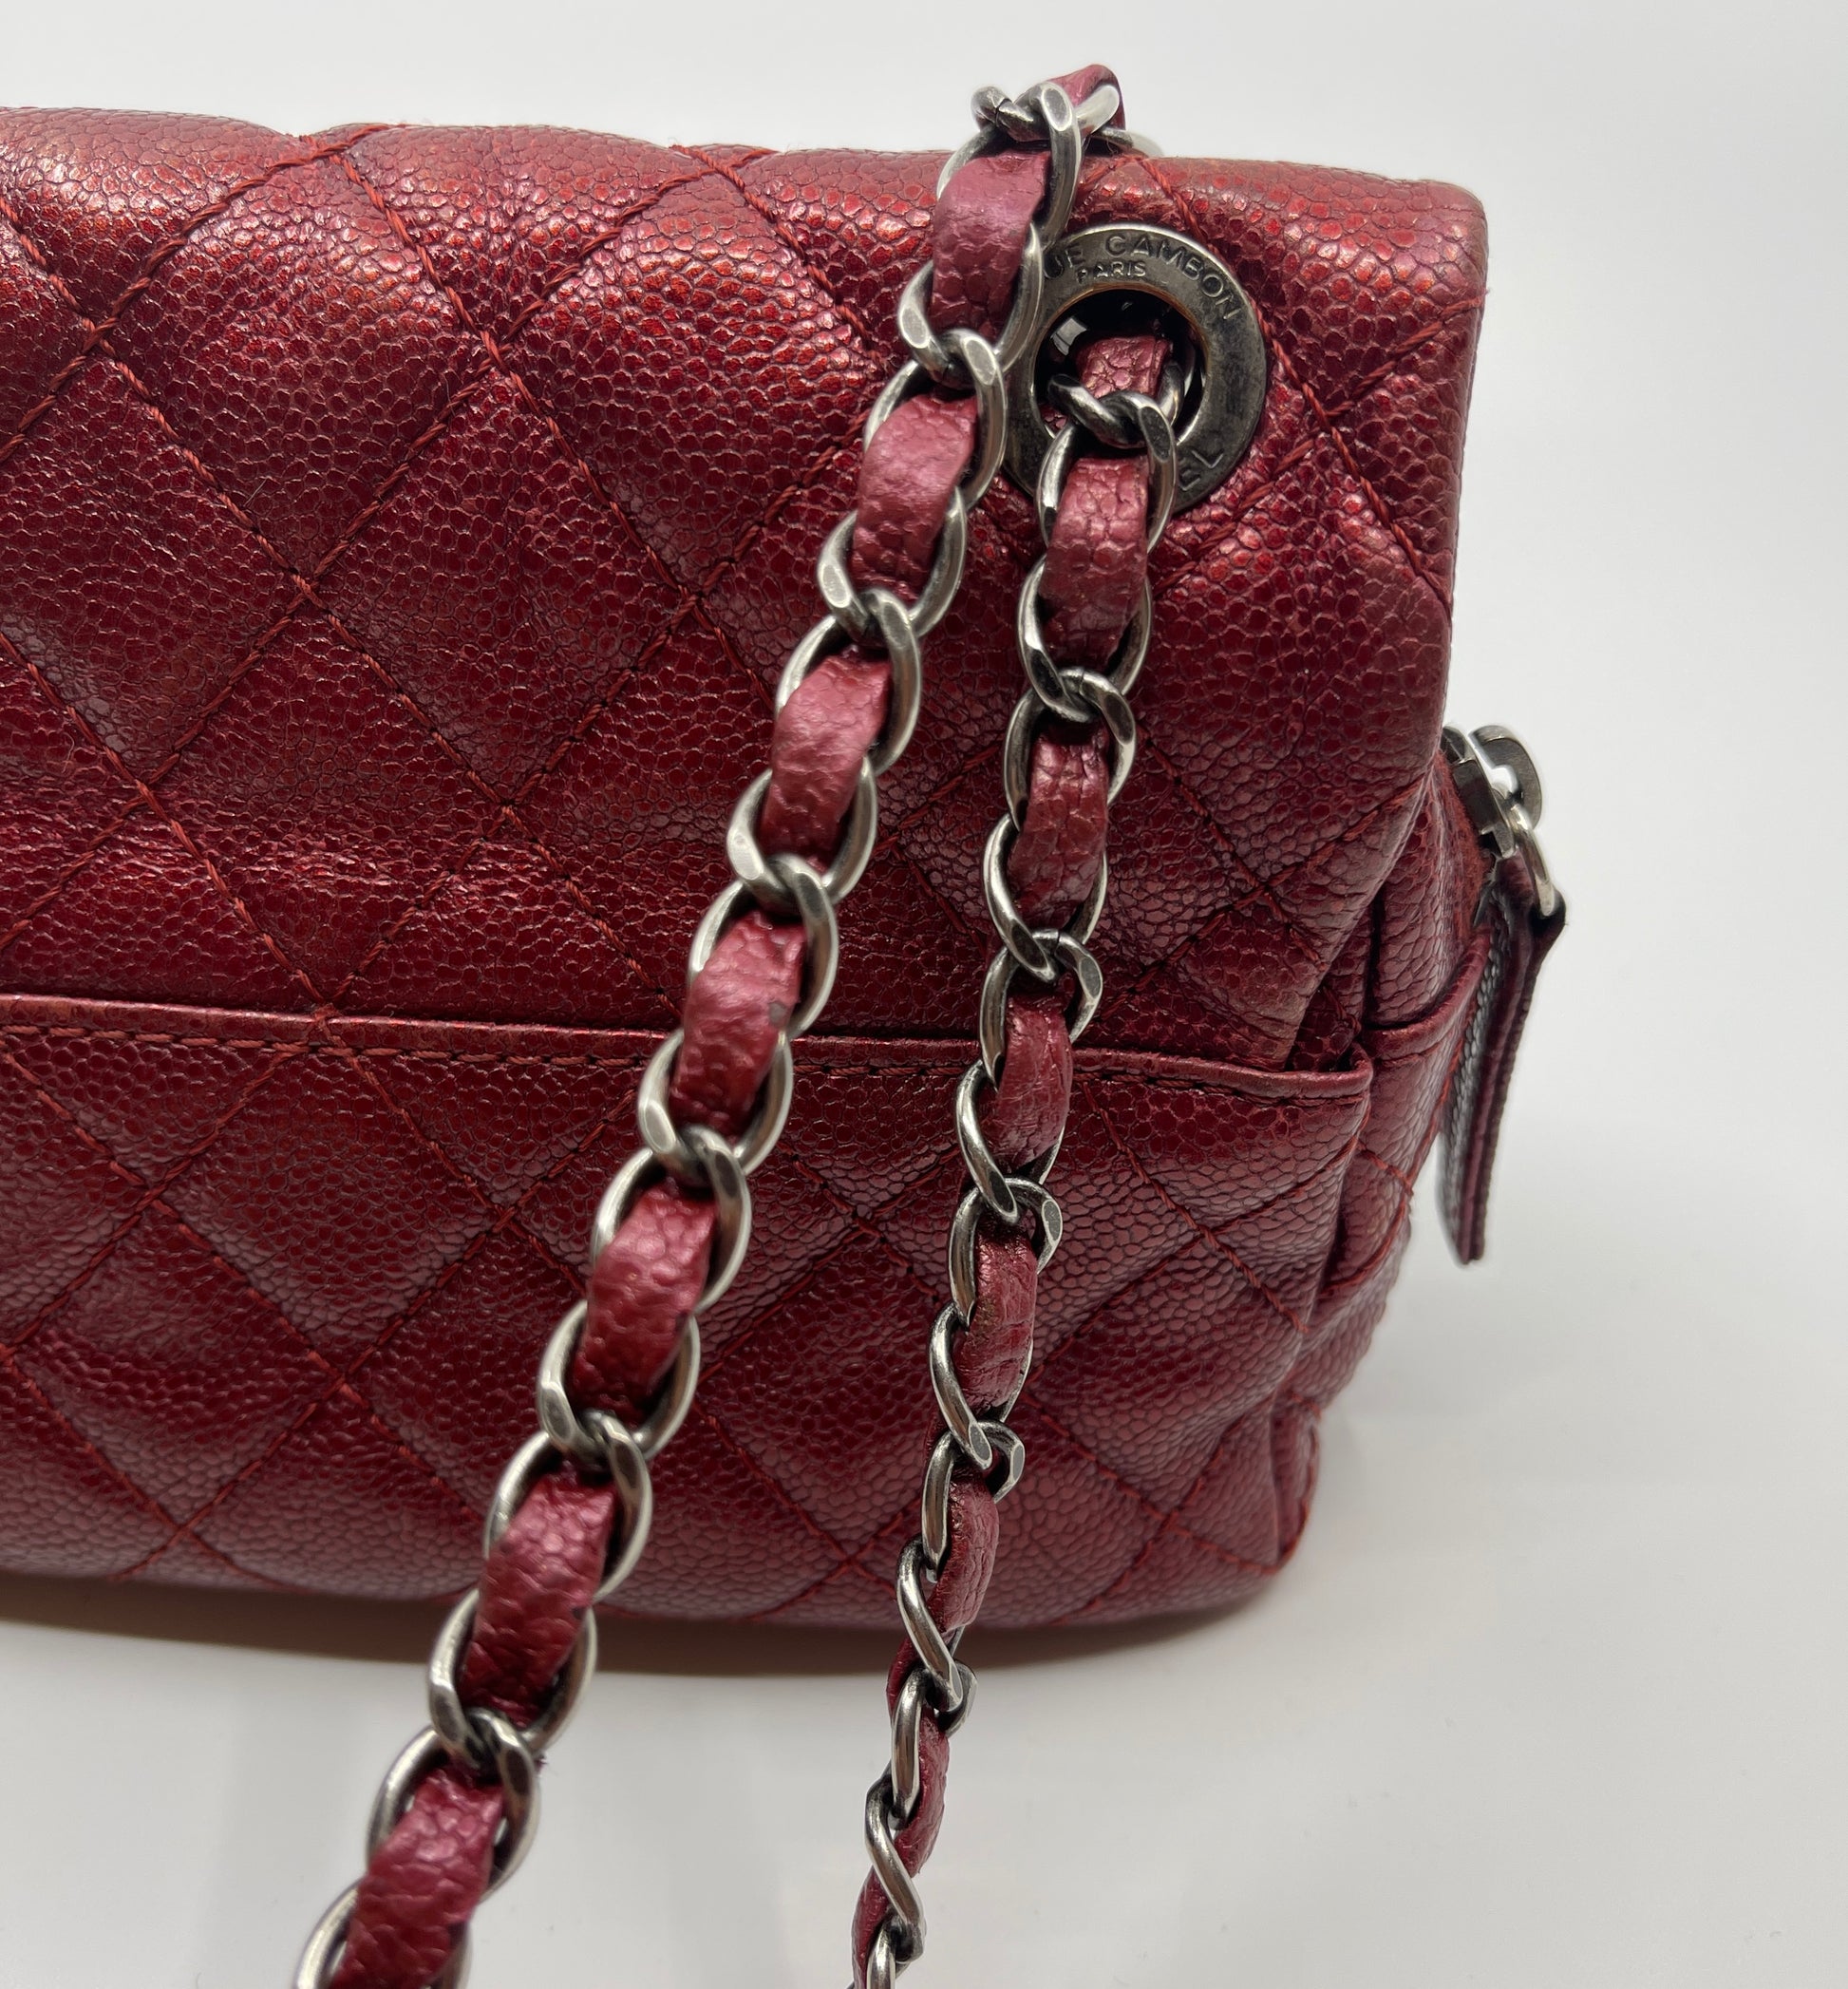 CHANEL Caviar Leather Exterior Quilted Bags & Handbags for Women